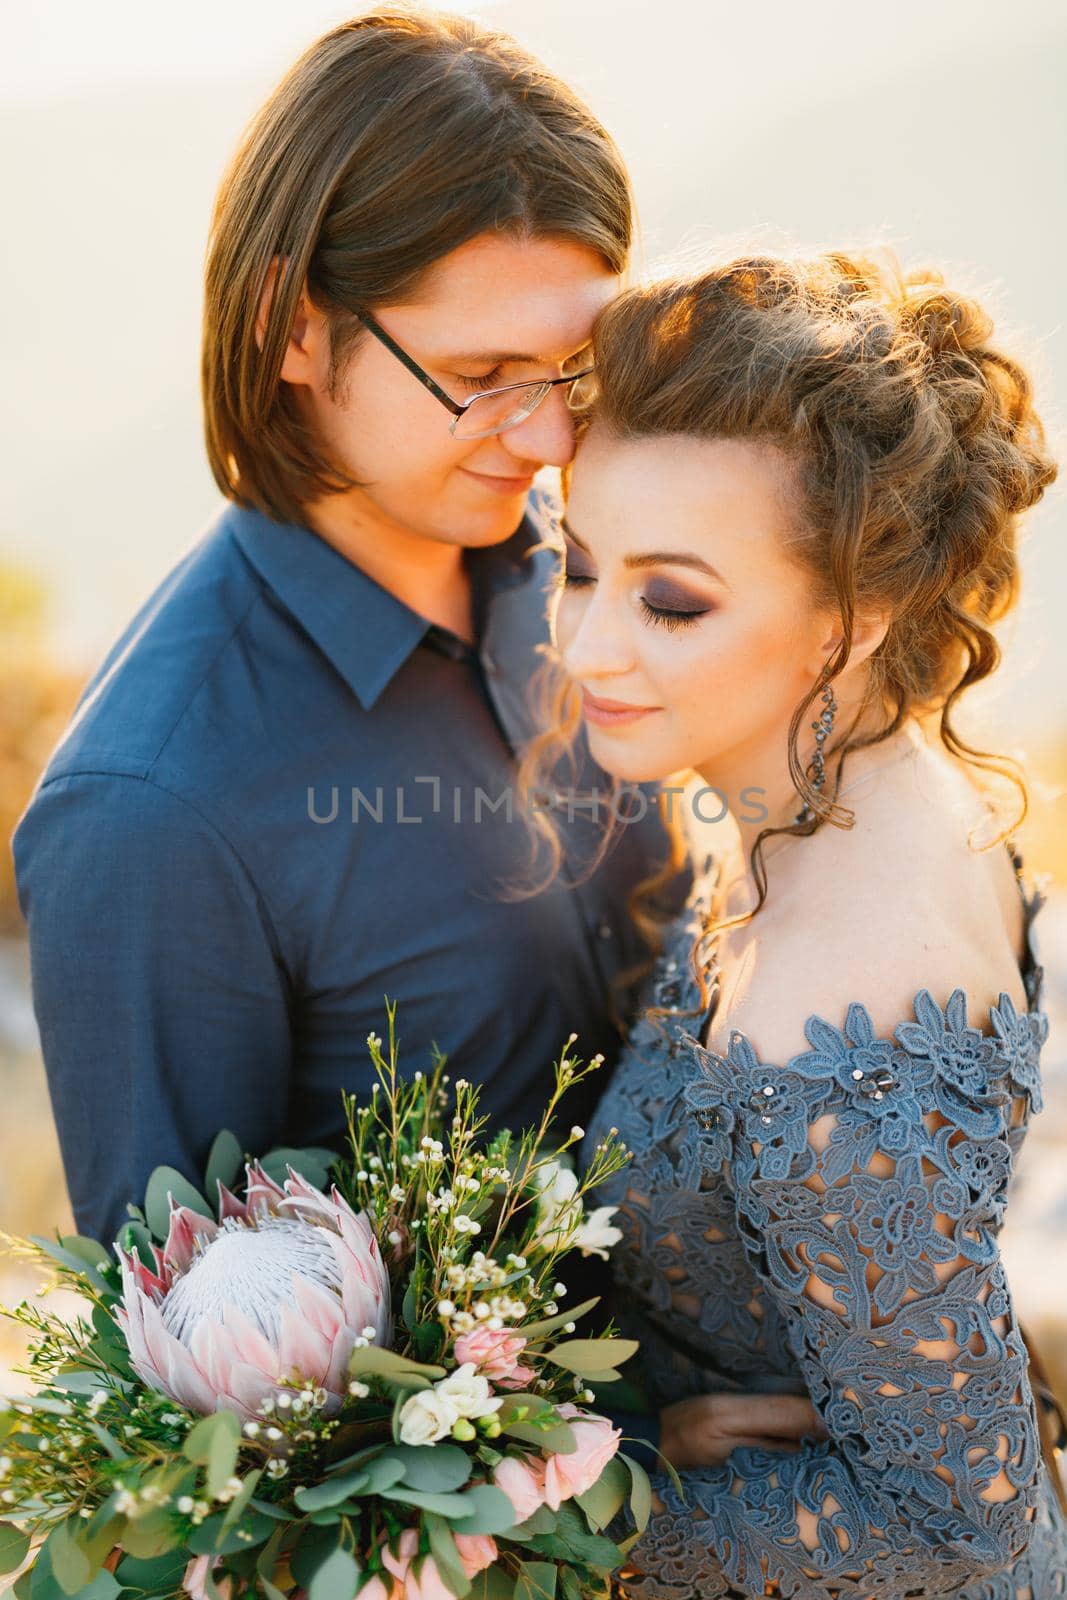 The bride and groom tenderly hug, the bride holds a bouquet with protea, eucalyptus and roses in her hands, close-up. High quality photo